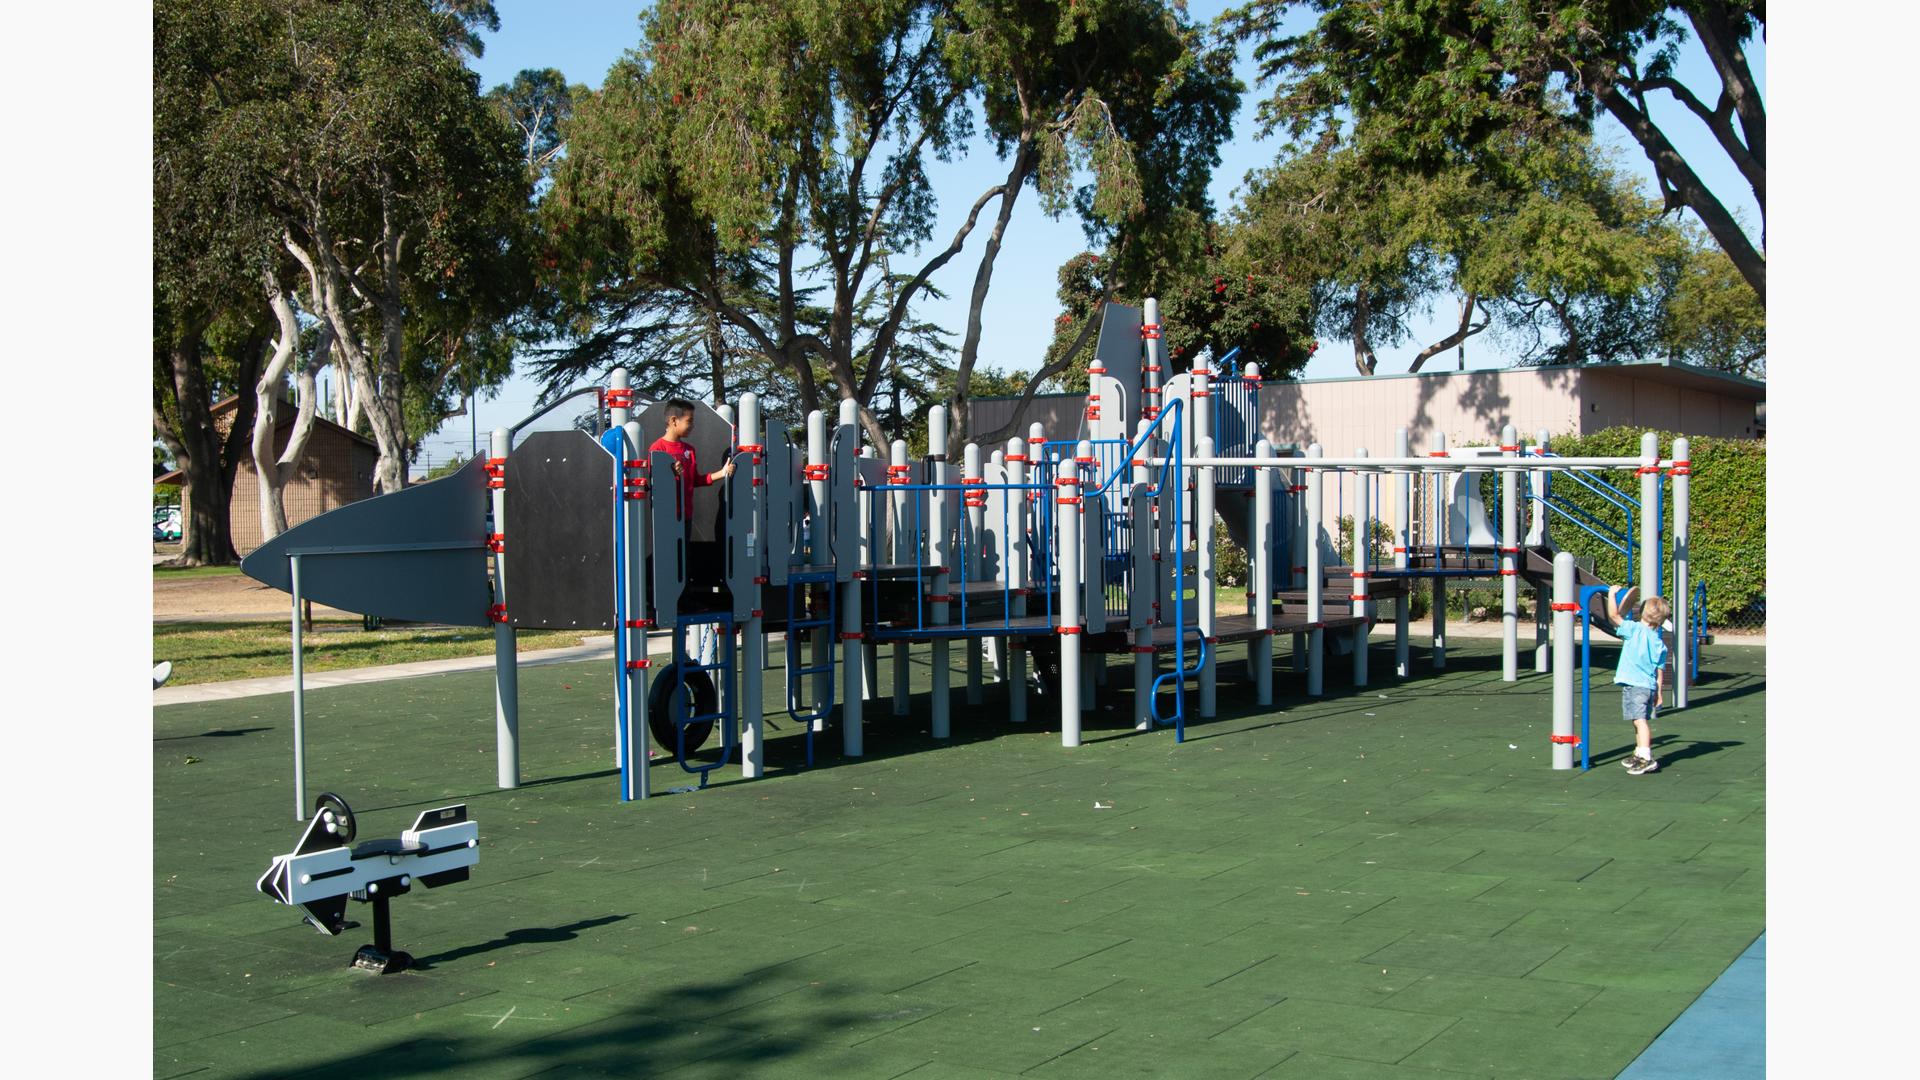 Custom F-6 fighter jet play structure at Colonia Park